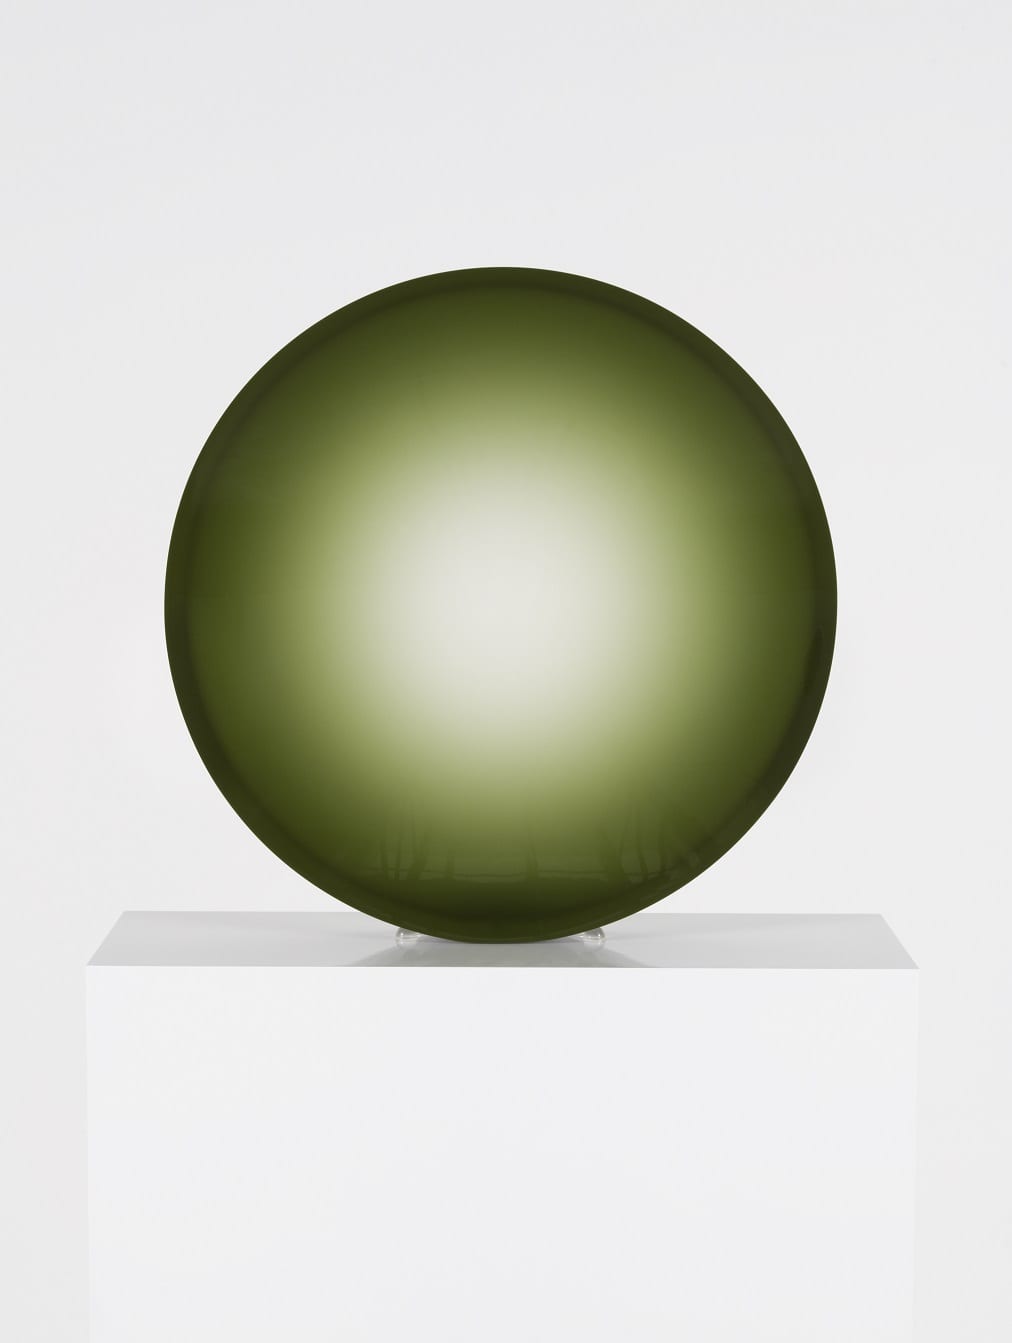 A Fred Eversley sculpture in the form of a green concave lens.